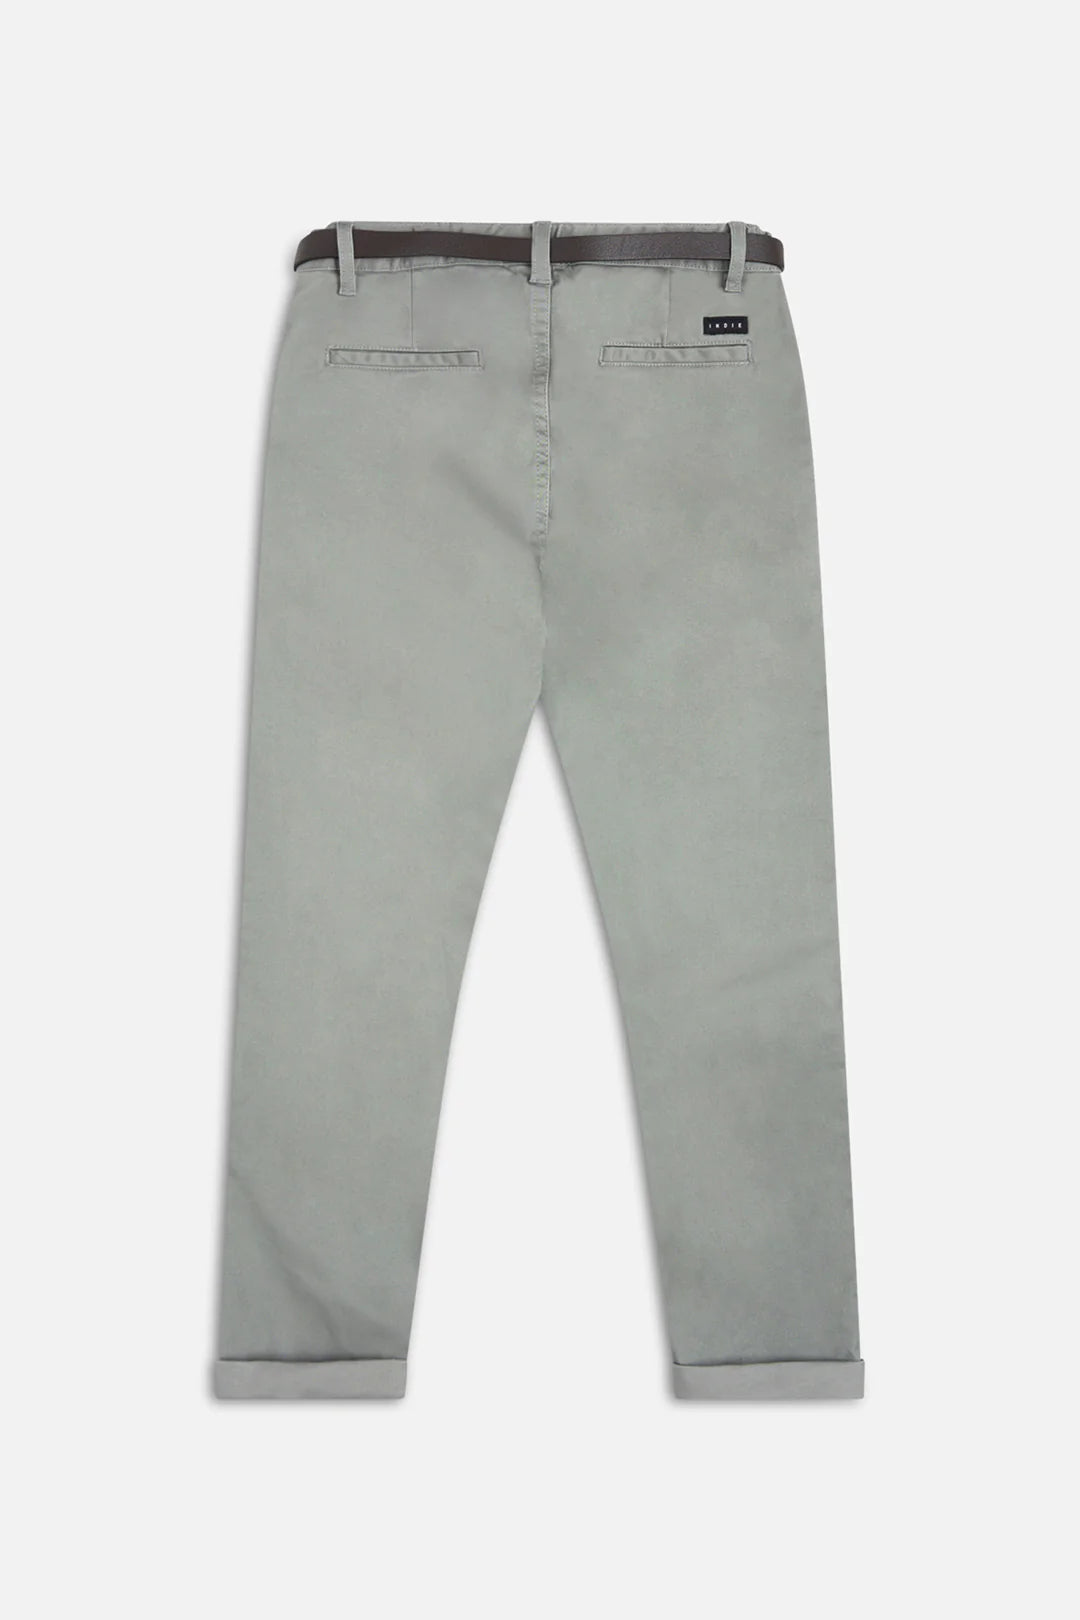 Indie Kids Cuba Stretch Chino - Thyme (3-7 Years)